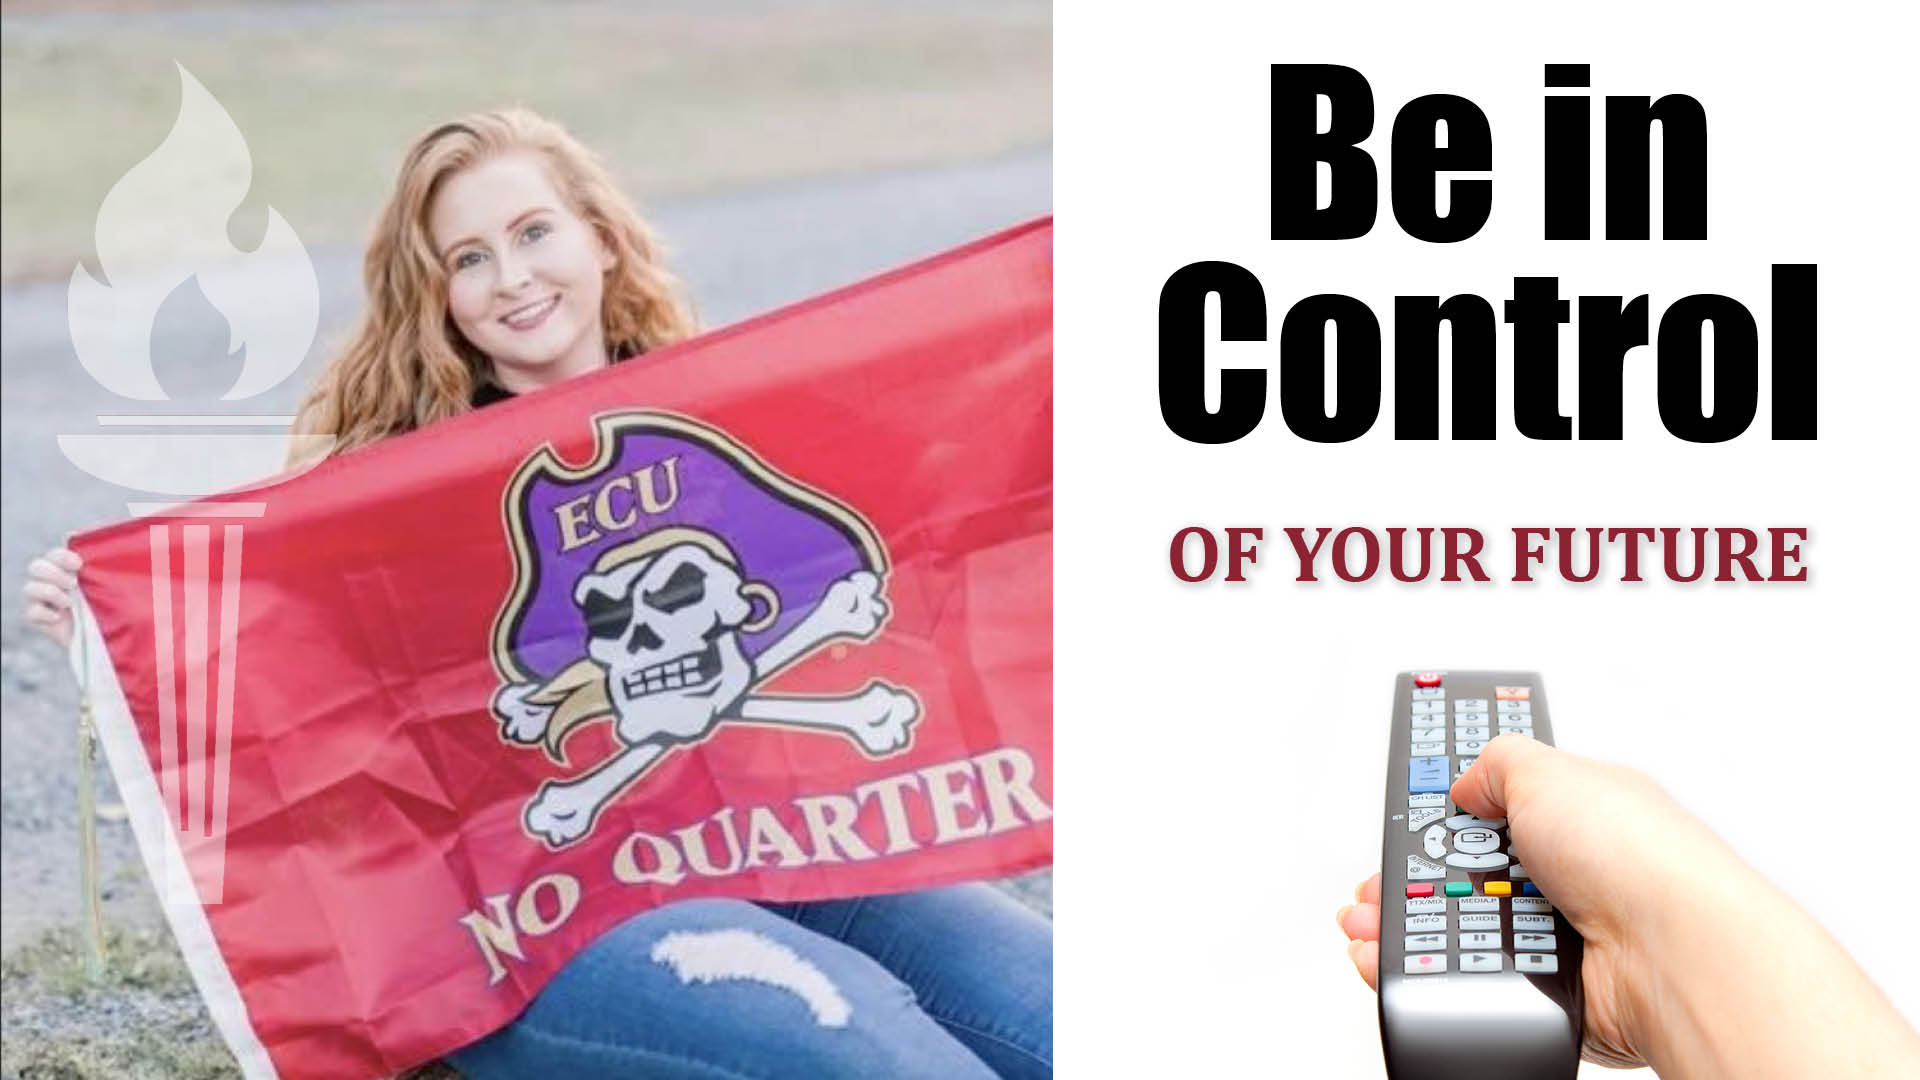 Kathryn Massagee holding a ECU flag within graphic that says be in control of your future